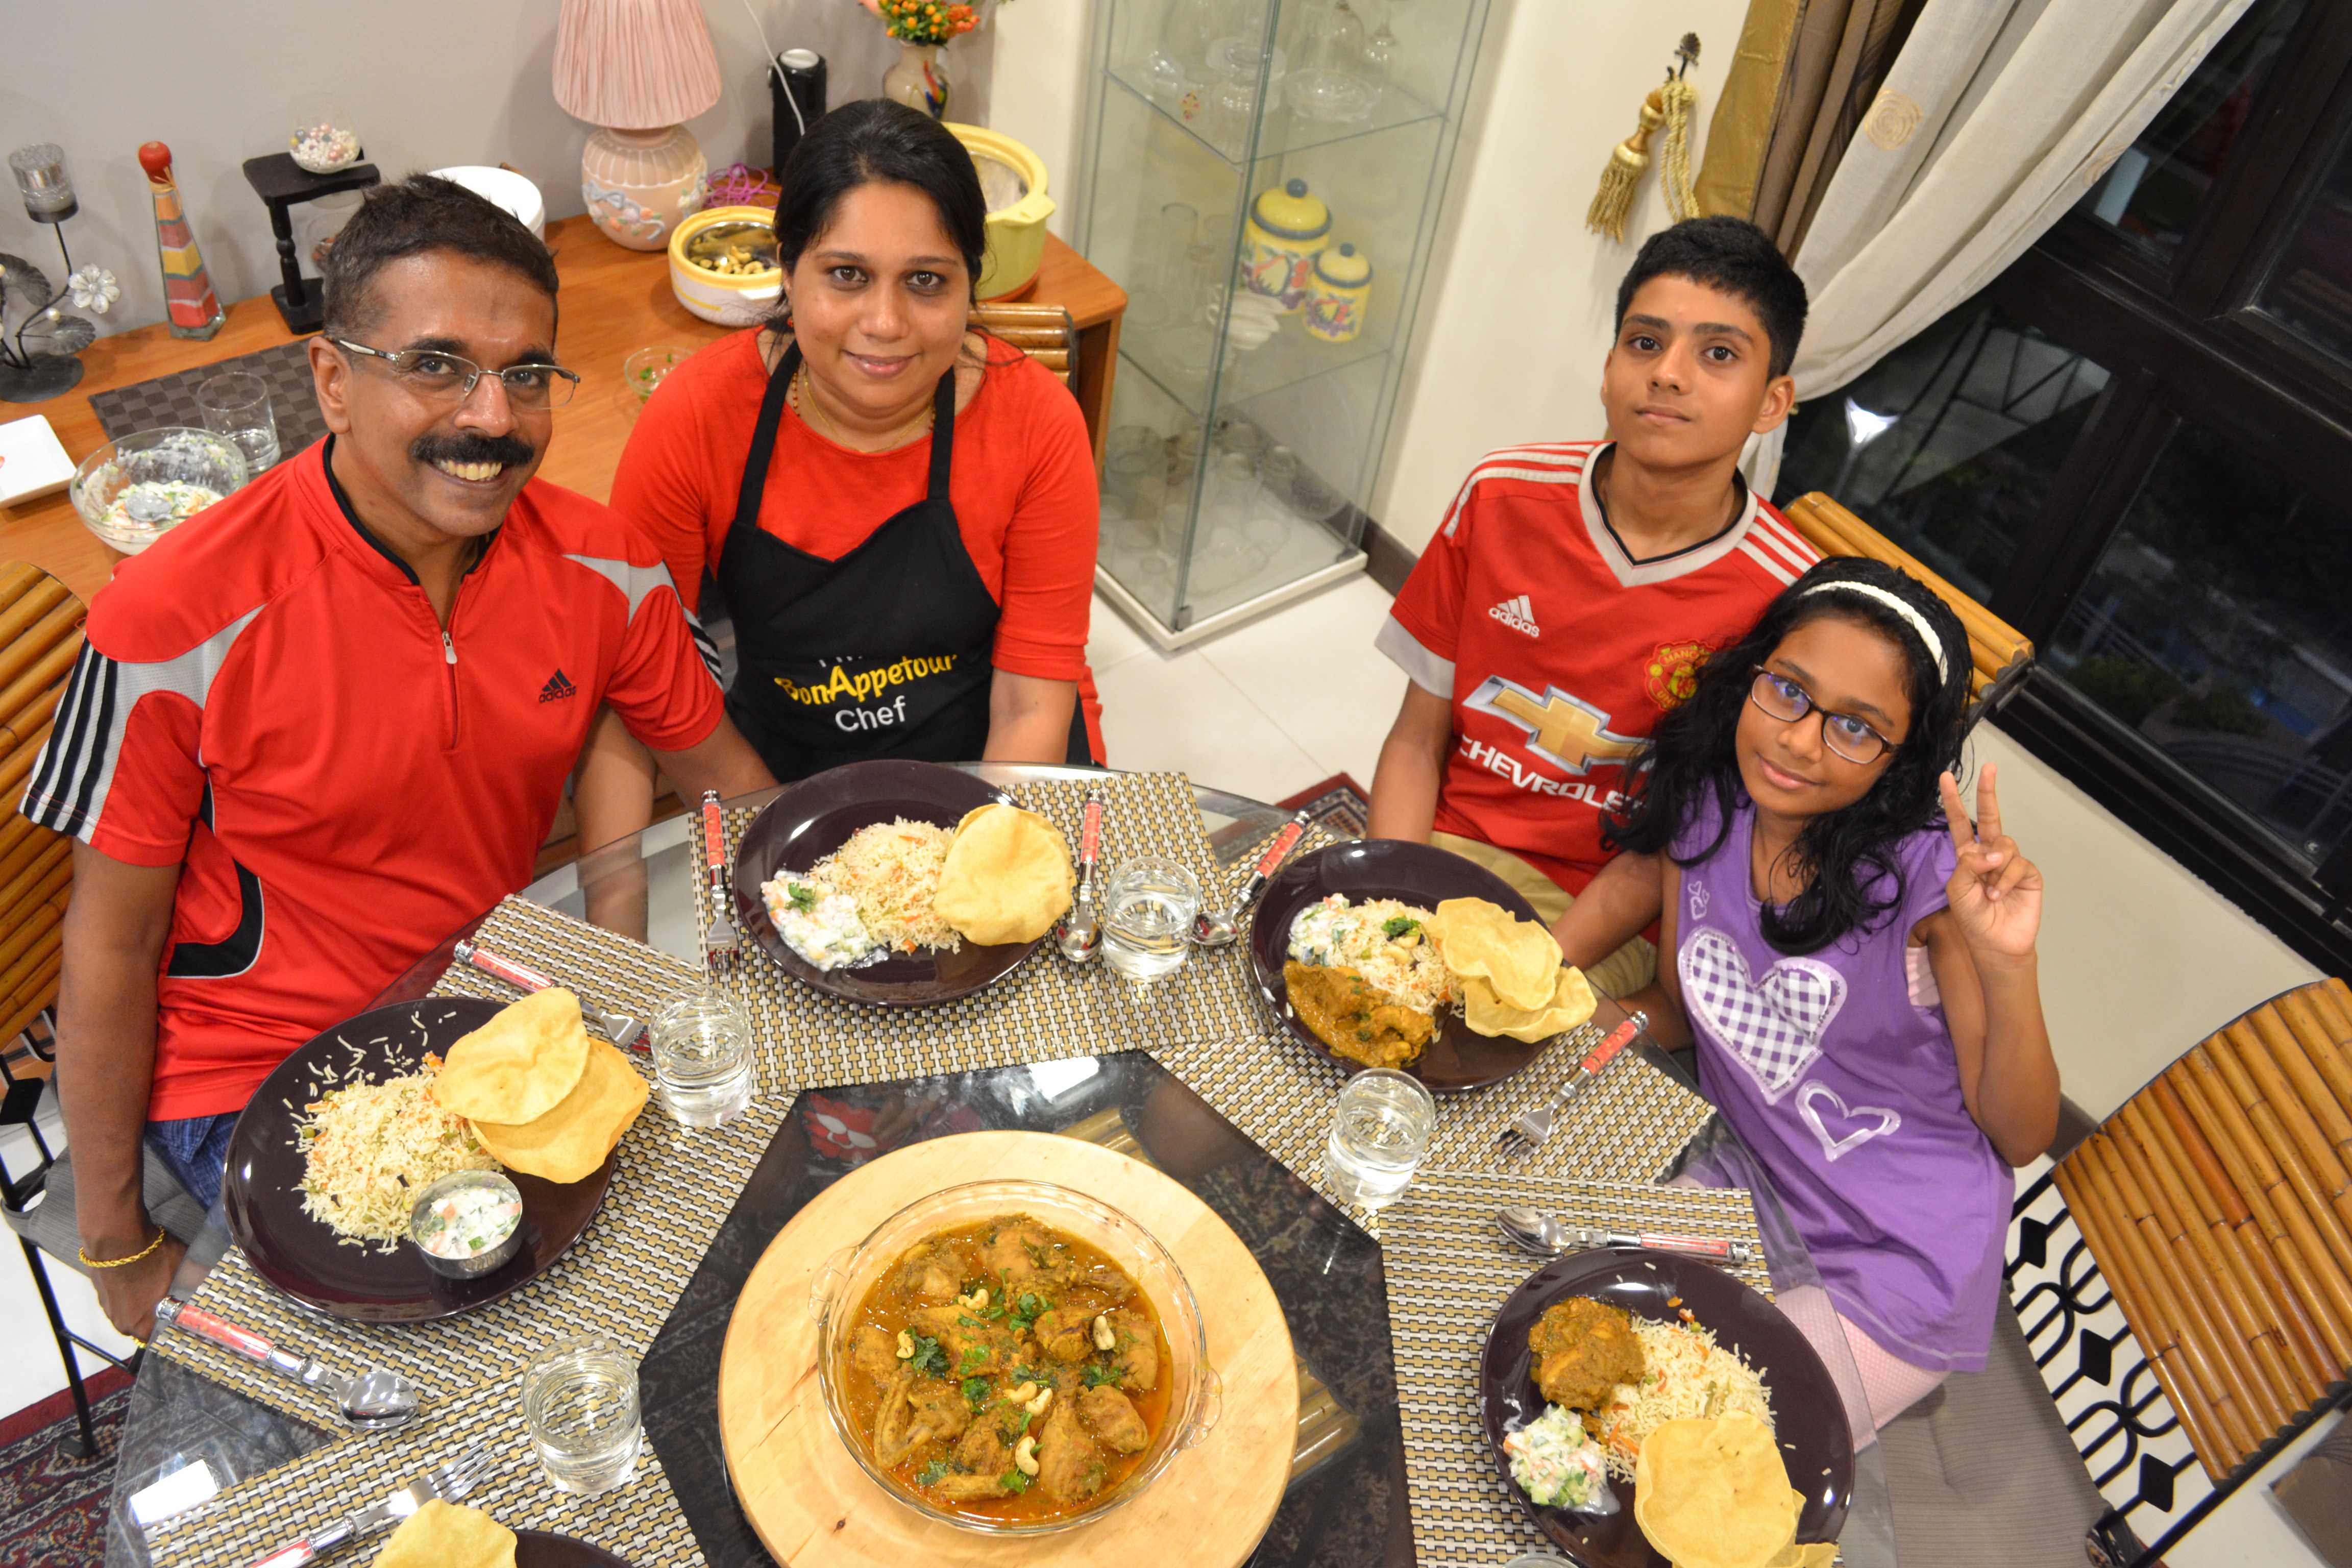 An Authentic Kerala Indian Cuisine dining experience with Rani and her family in Singapore